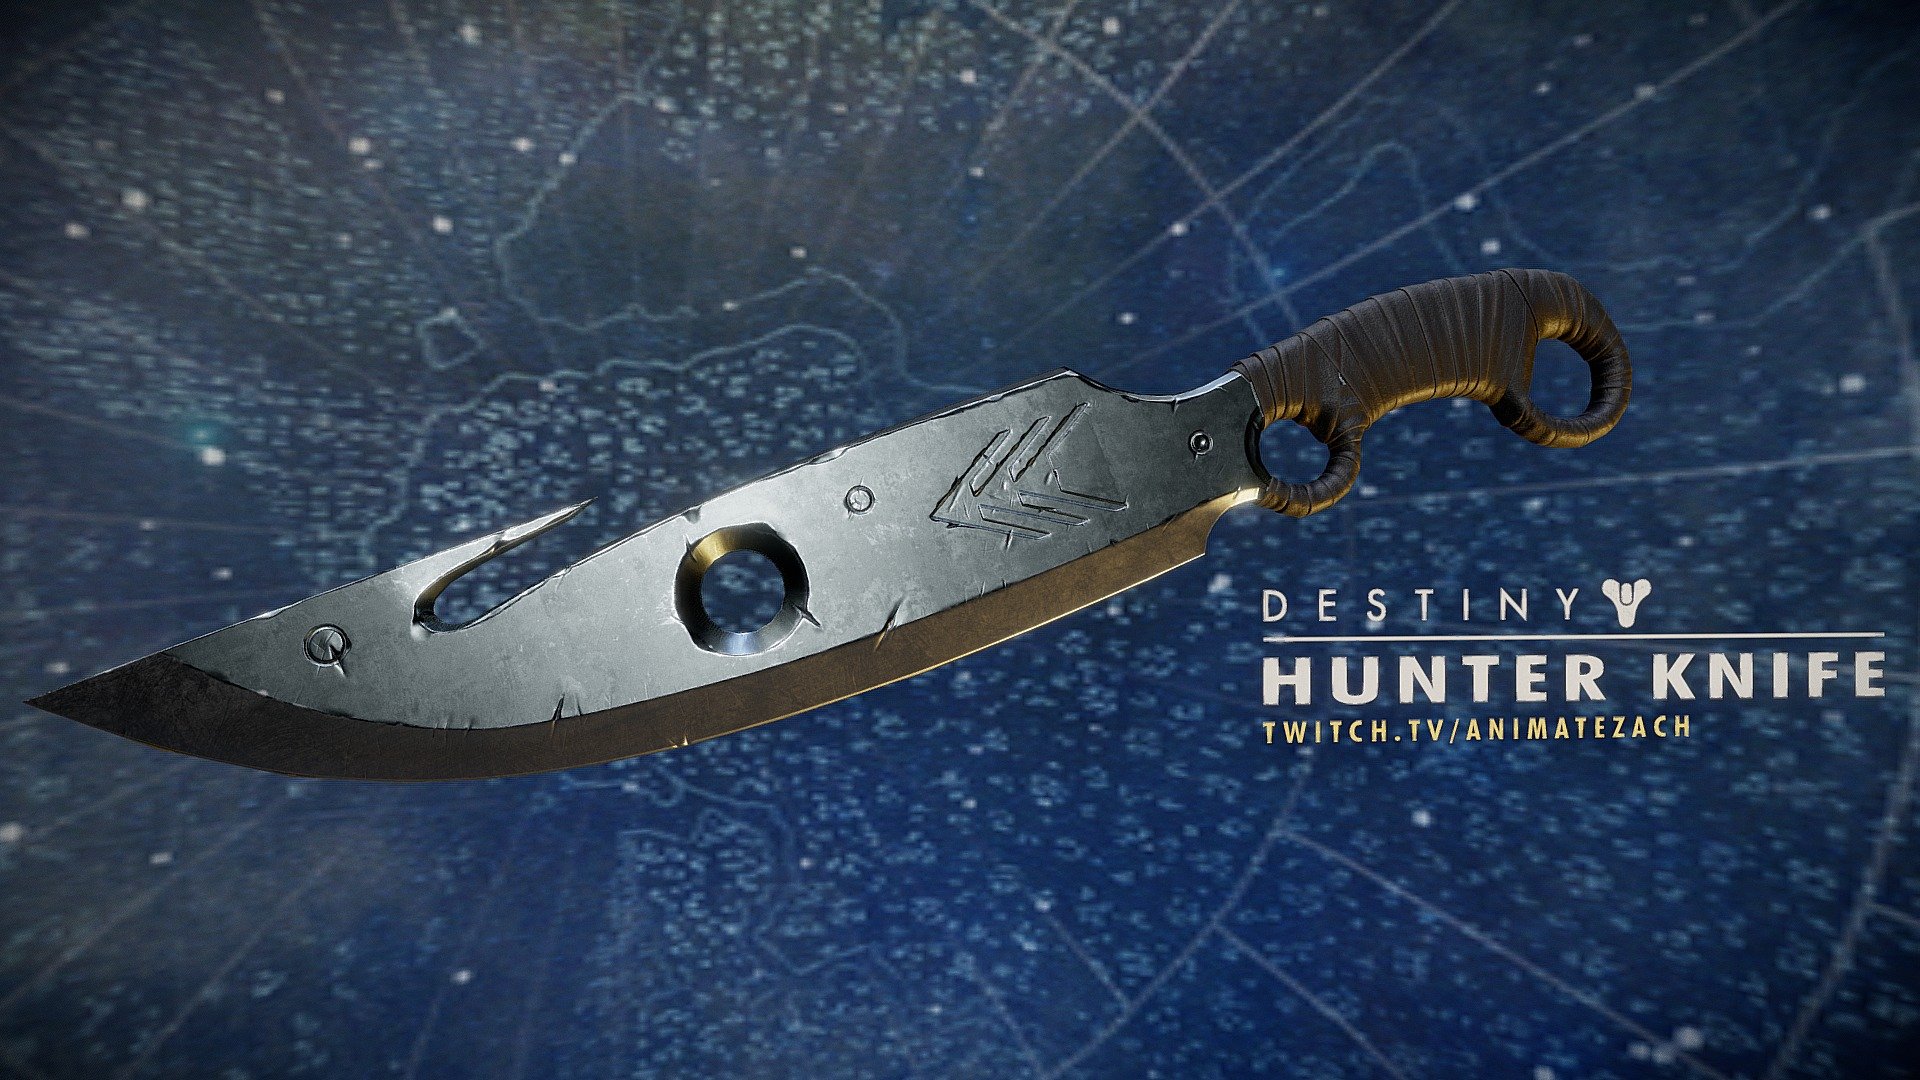 A Hunter’s Knife is a lethal tool, best utilized for sending an up close and personal message. Weapon featured in the video game Destiny.

Modeled live at https://www.twitch.tv/animatezach - Destiny Hunter Knife - 3D model by animatezach 3d model